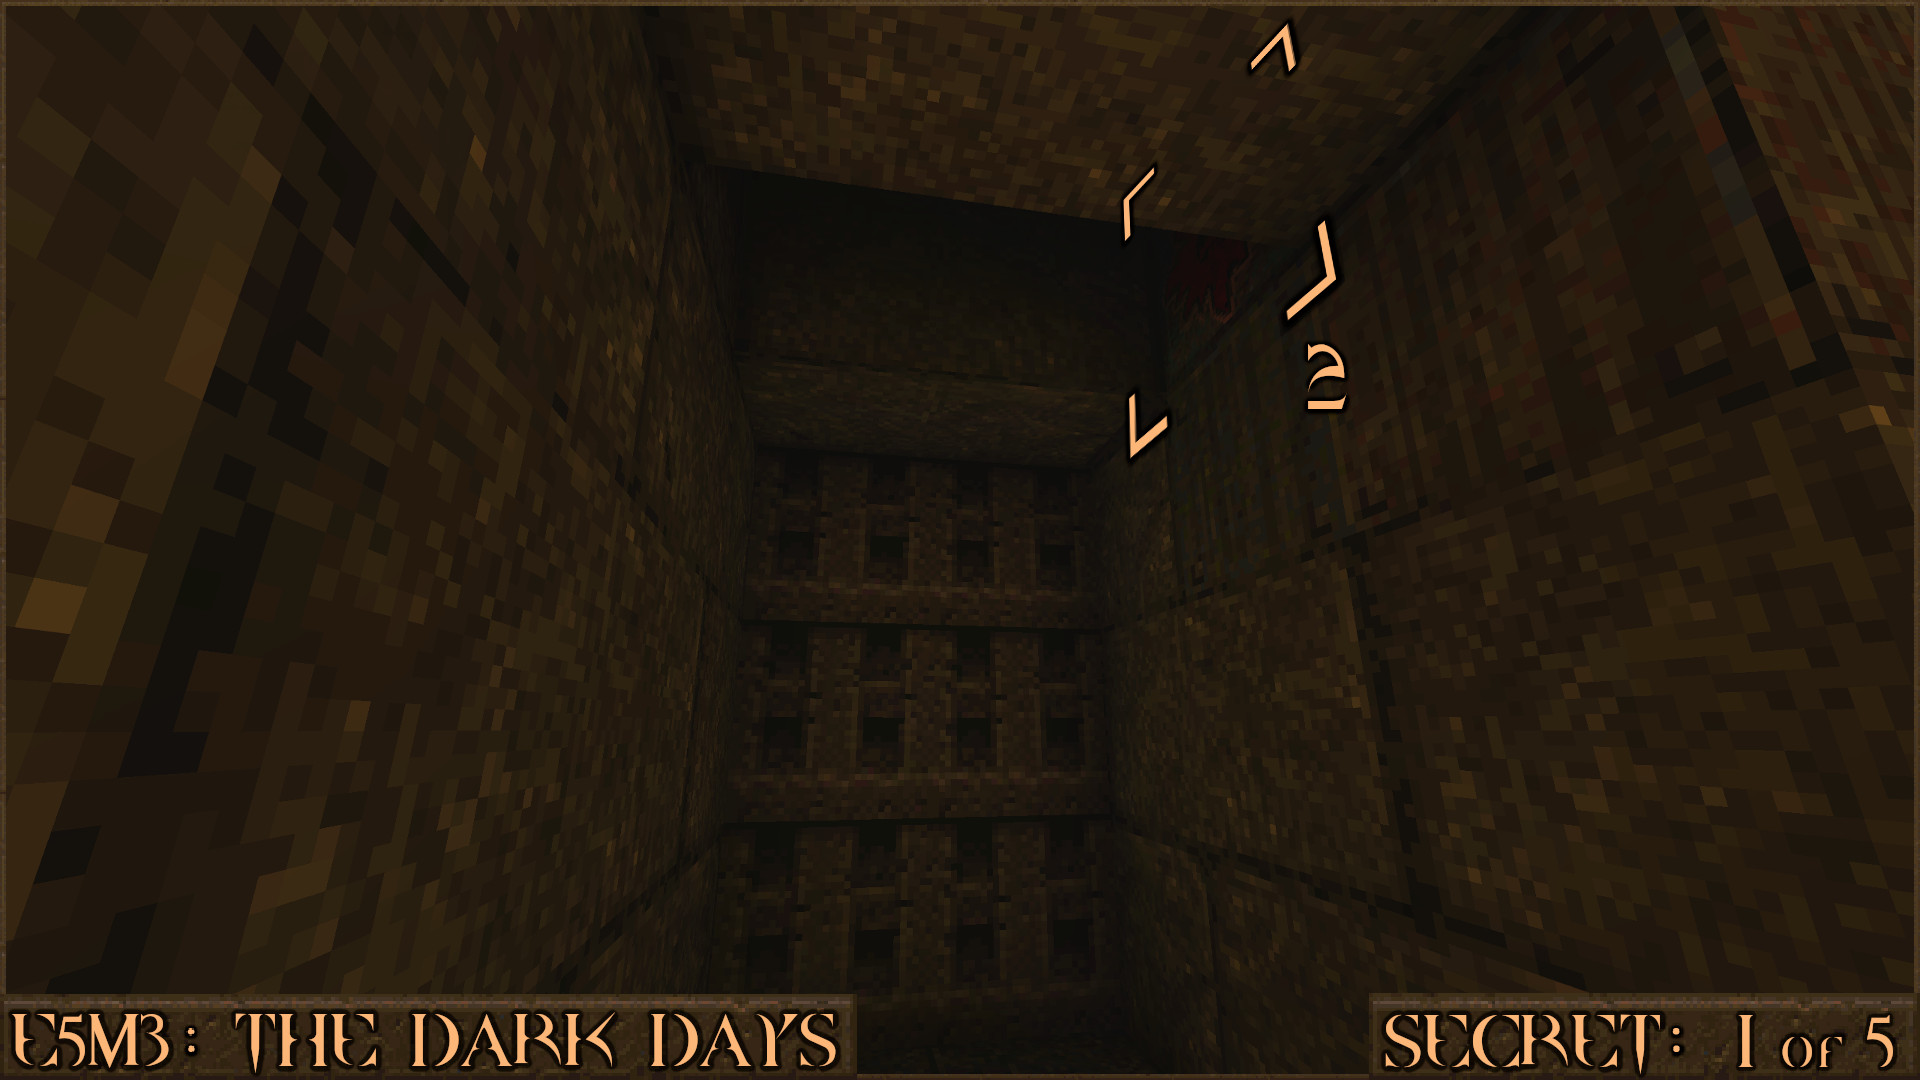 Quake Finding All Secrets in Quake Expansion pack: Dimension of the Past - E5M3: The Dark Days - 6F2A512